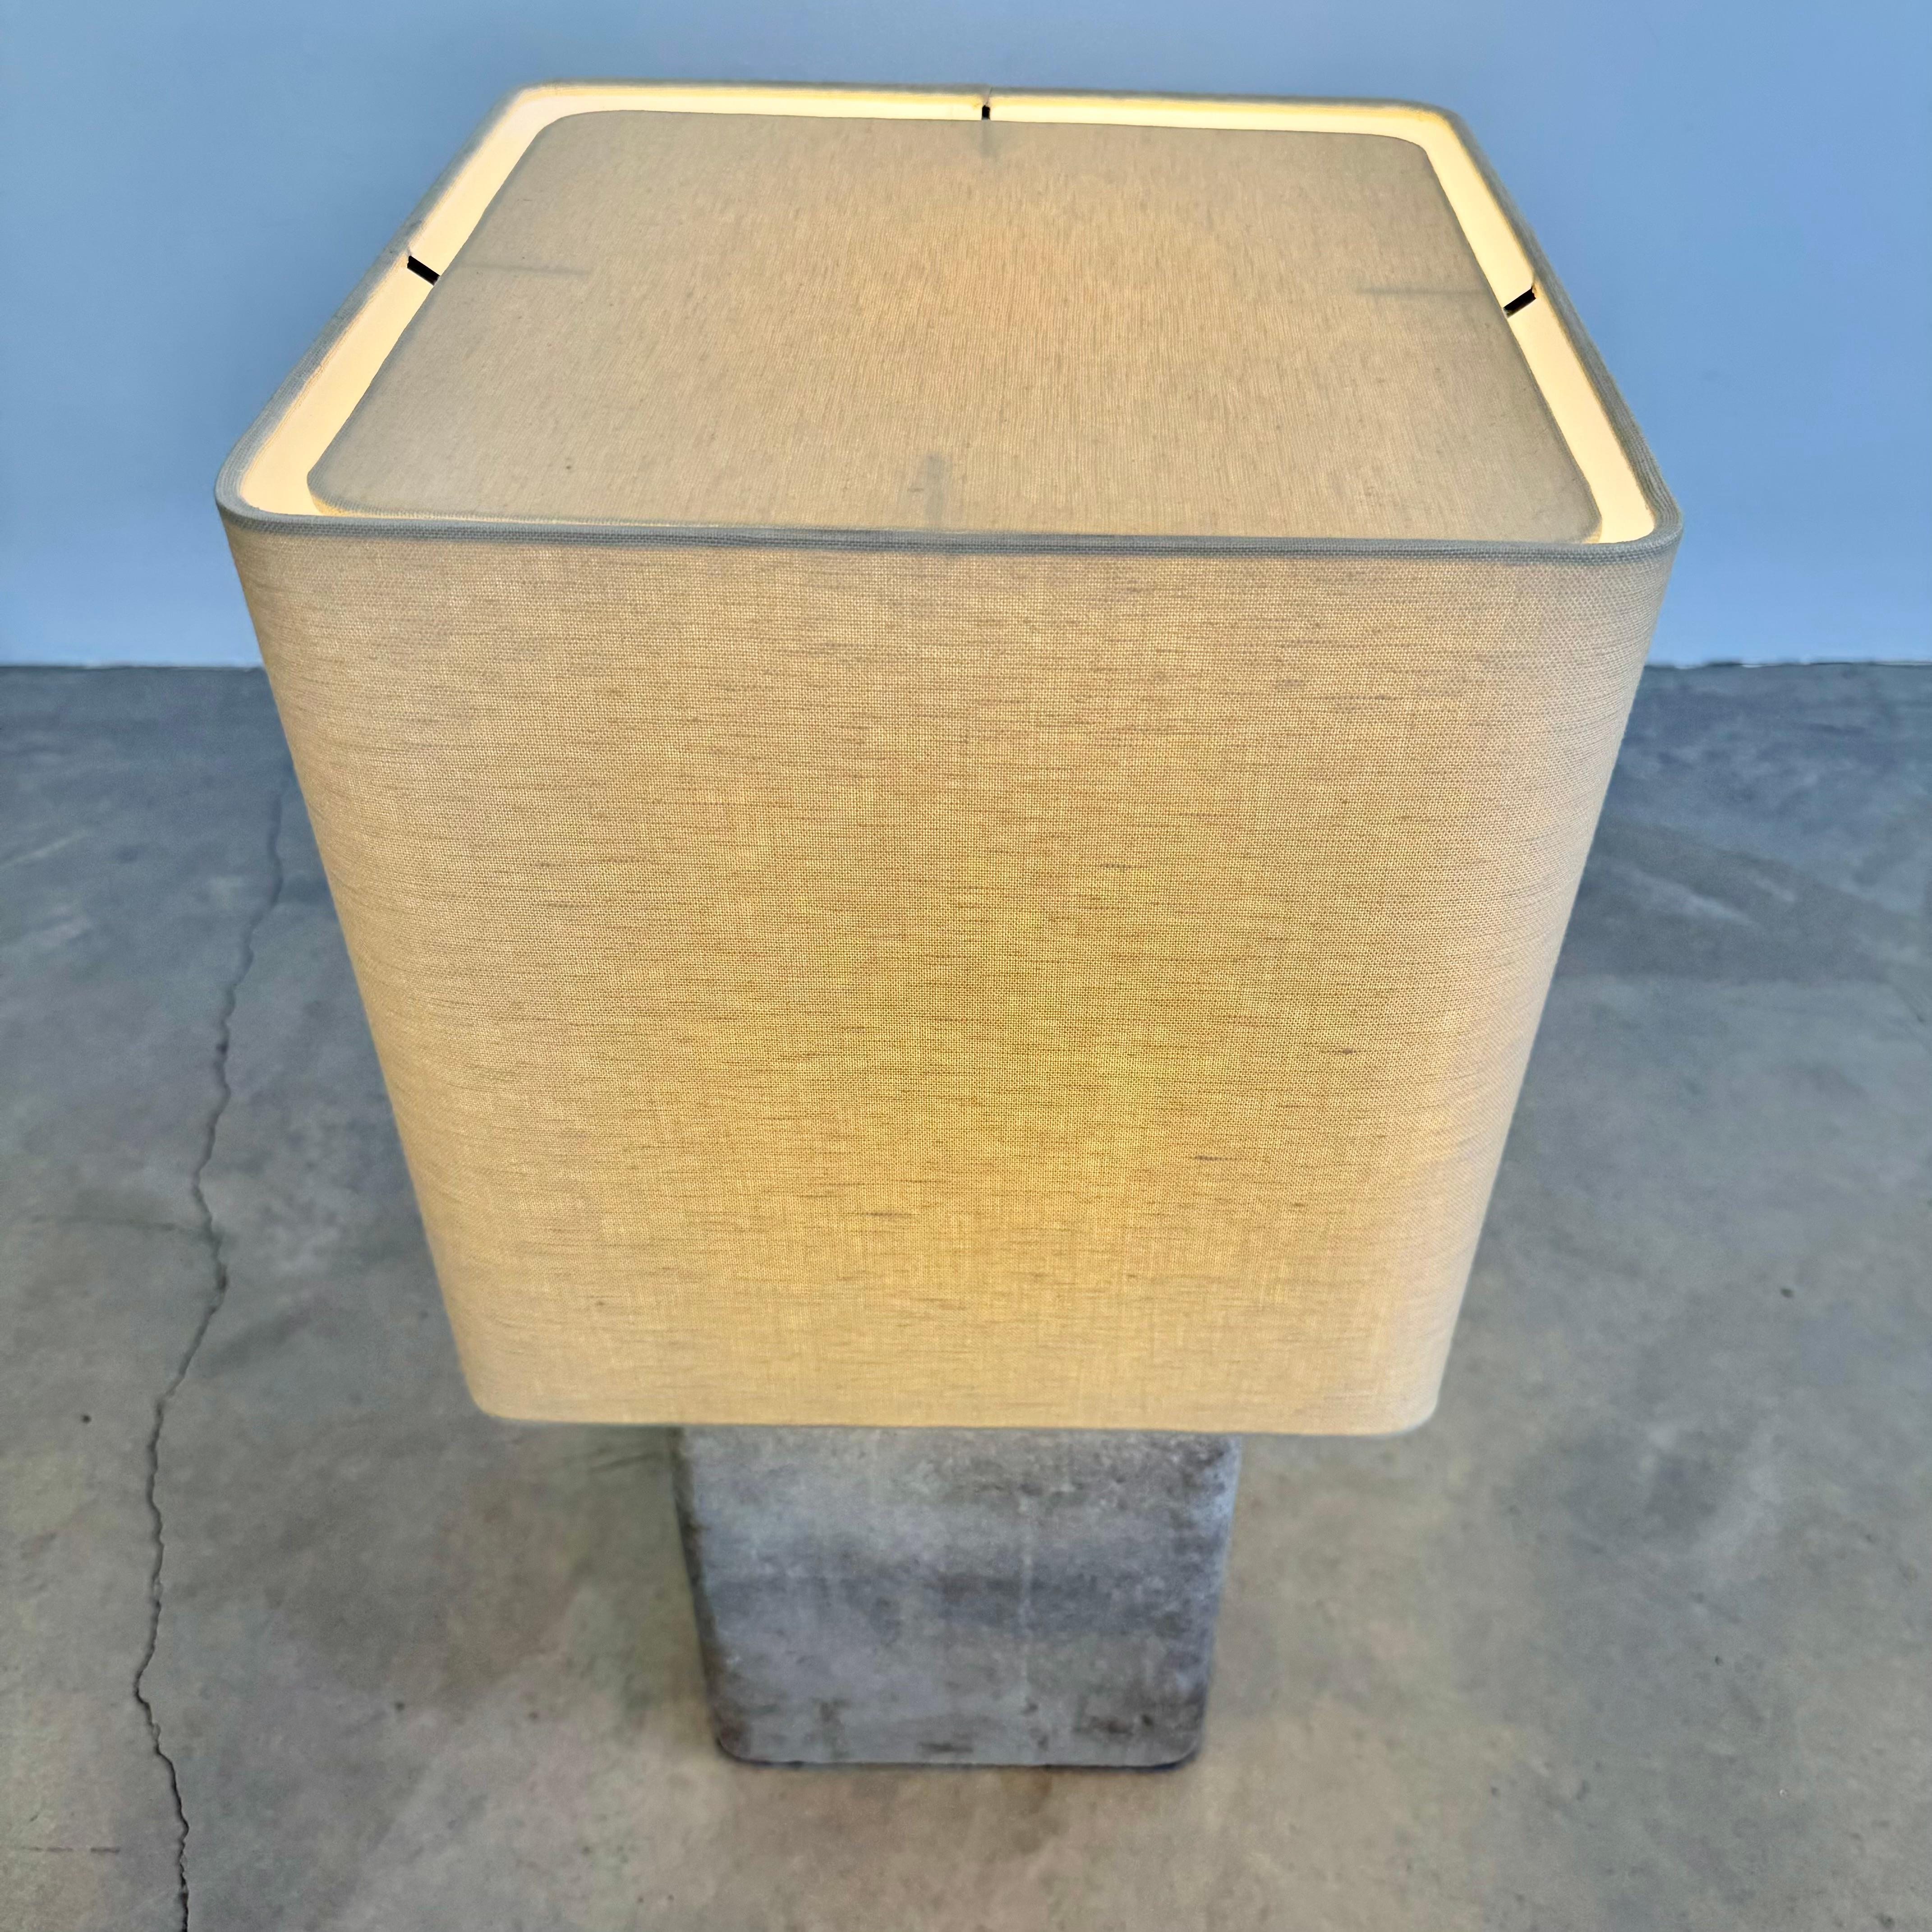 Willy Guhl Large Concrete Table Lamp, 1960s Switzerland For Sale 10